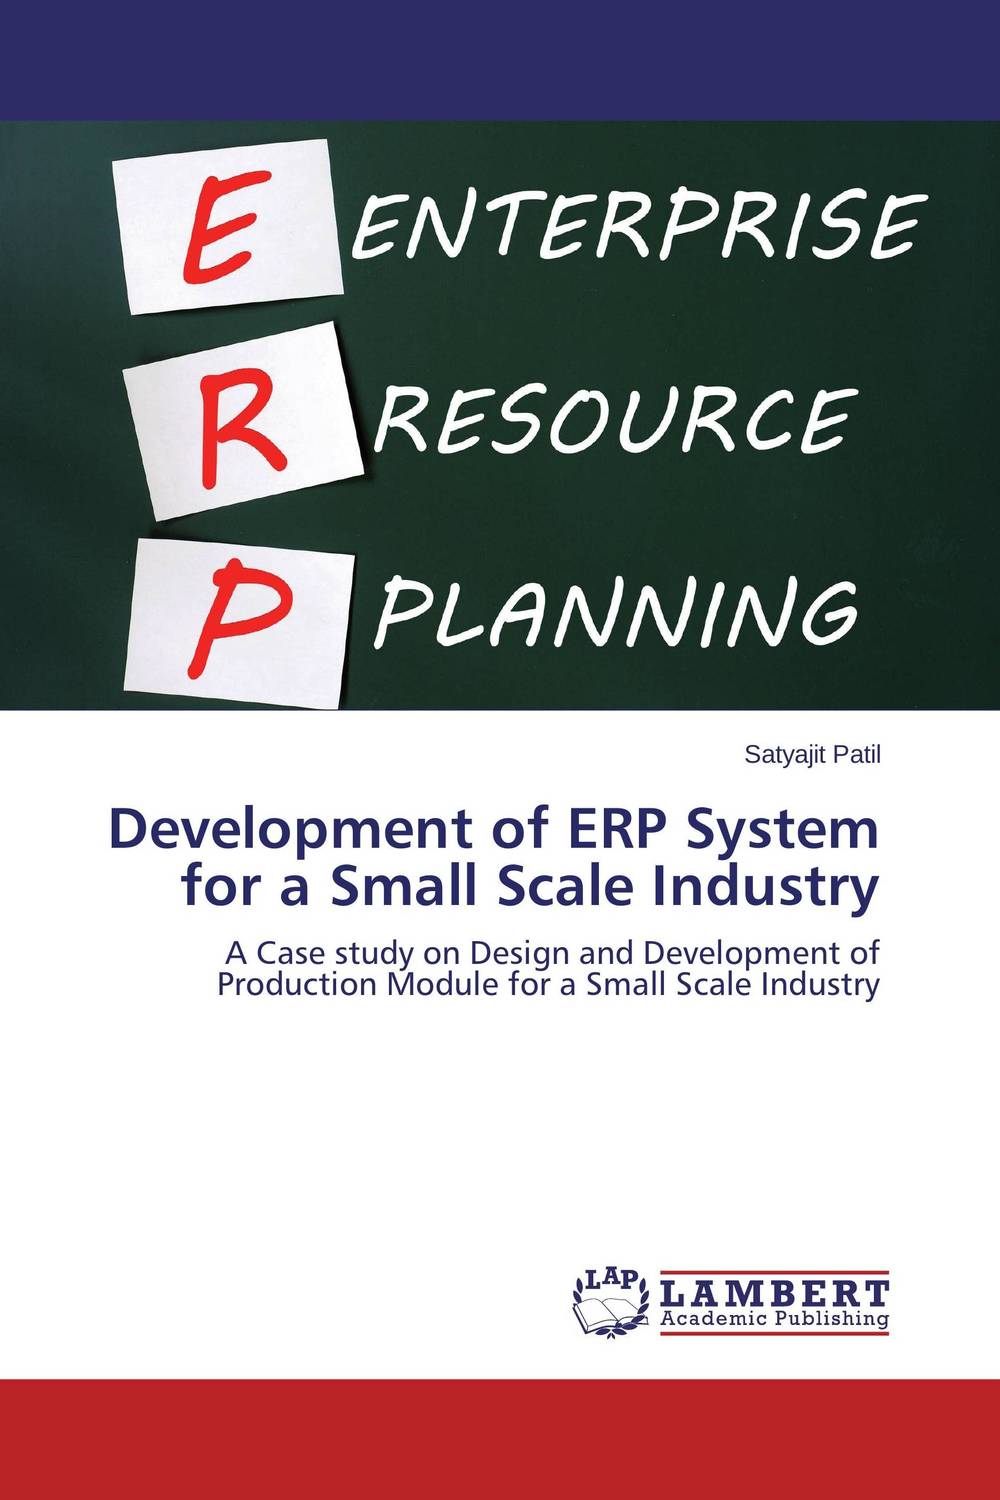 Development of ERP System for a Small Scale Industry